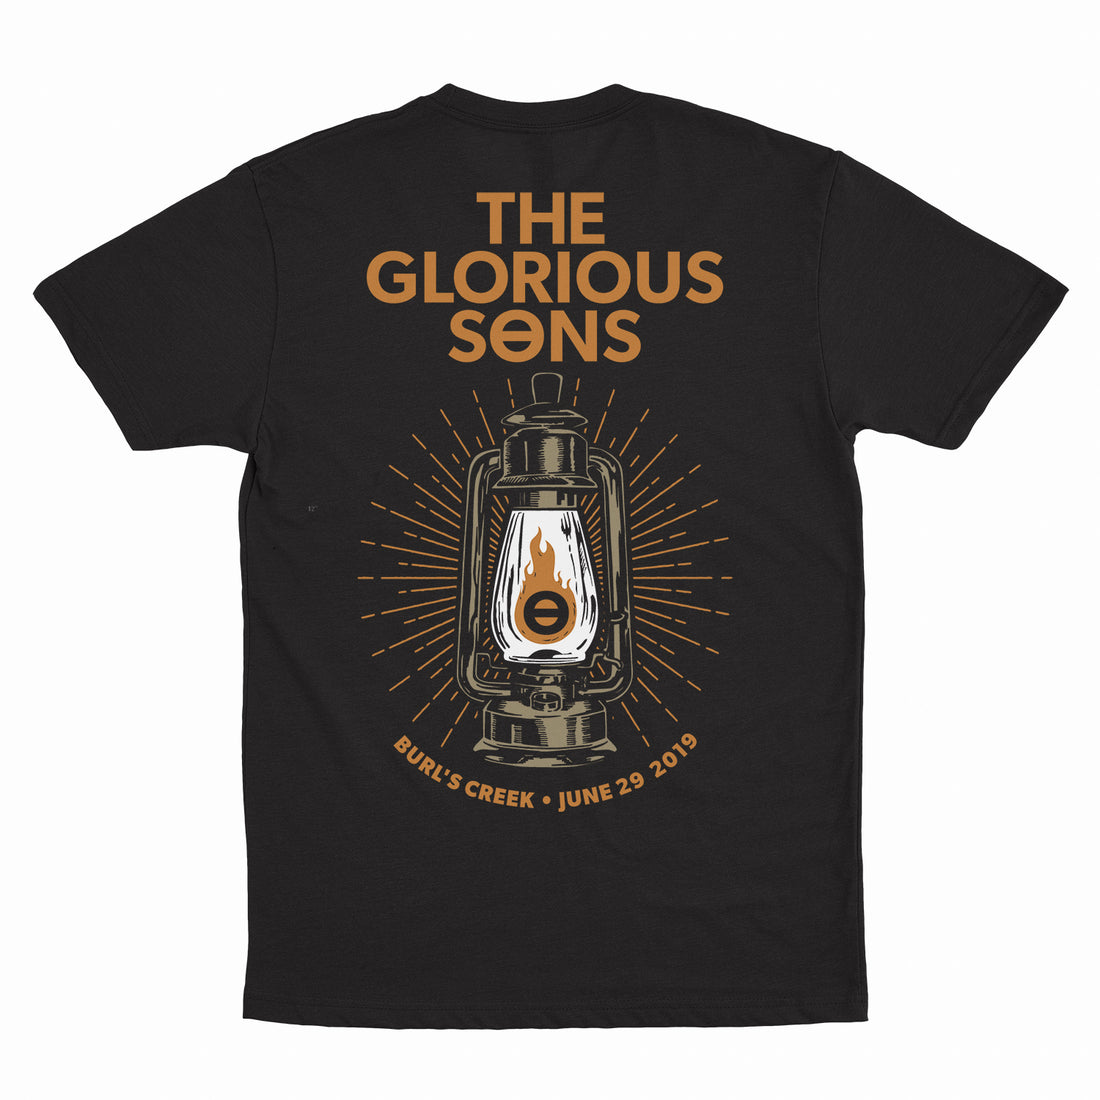 The Glorious Sons - Burl's Creek - Exclusive Festival Tee